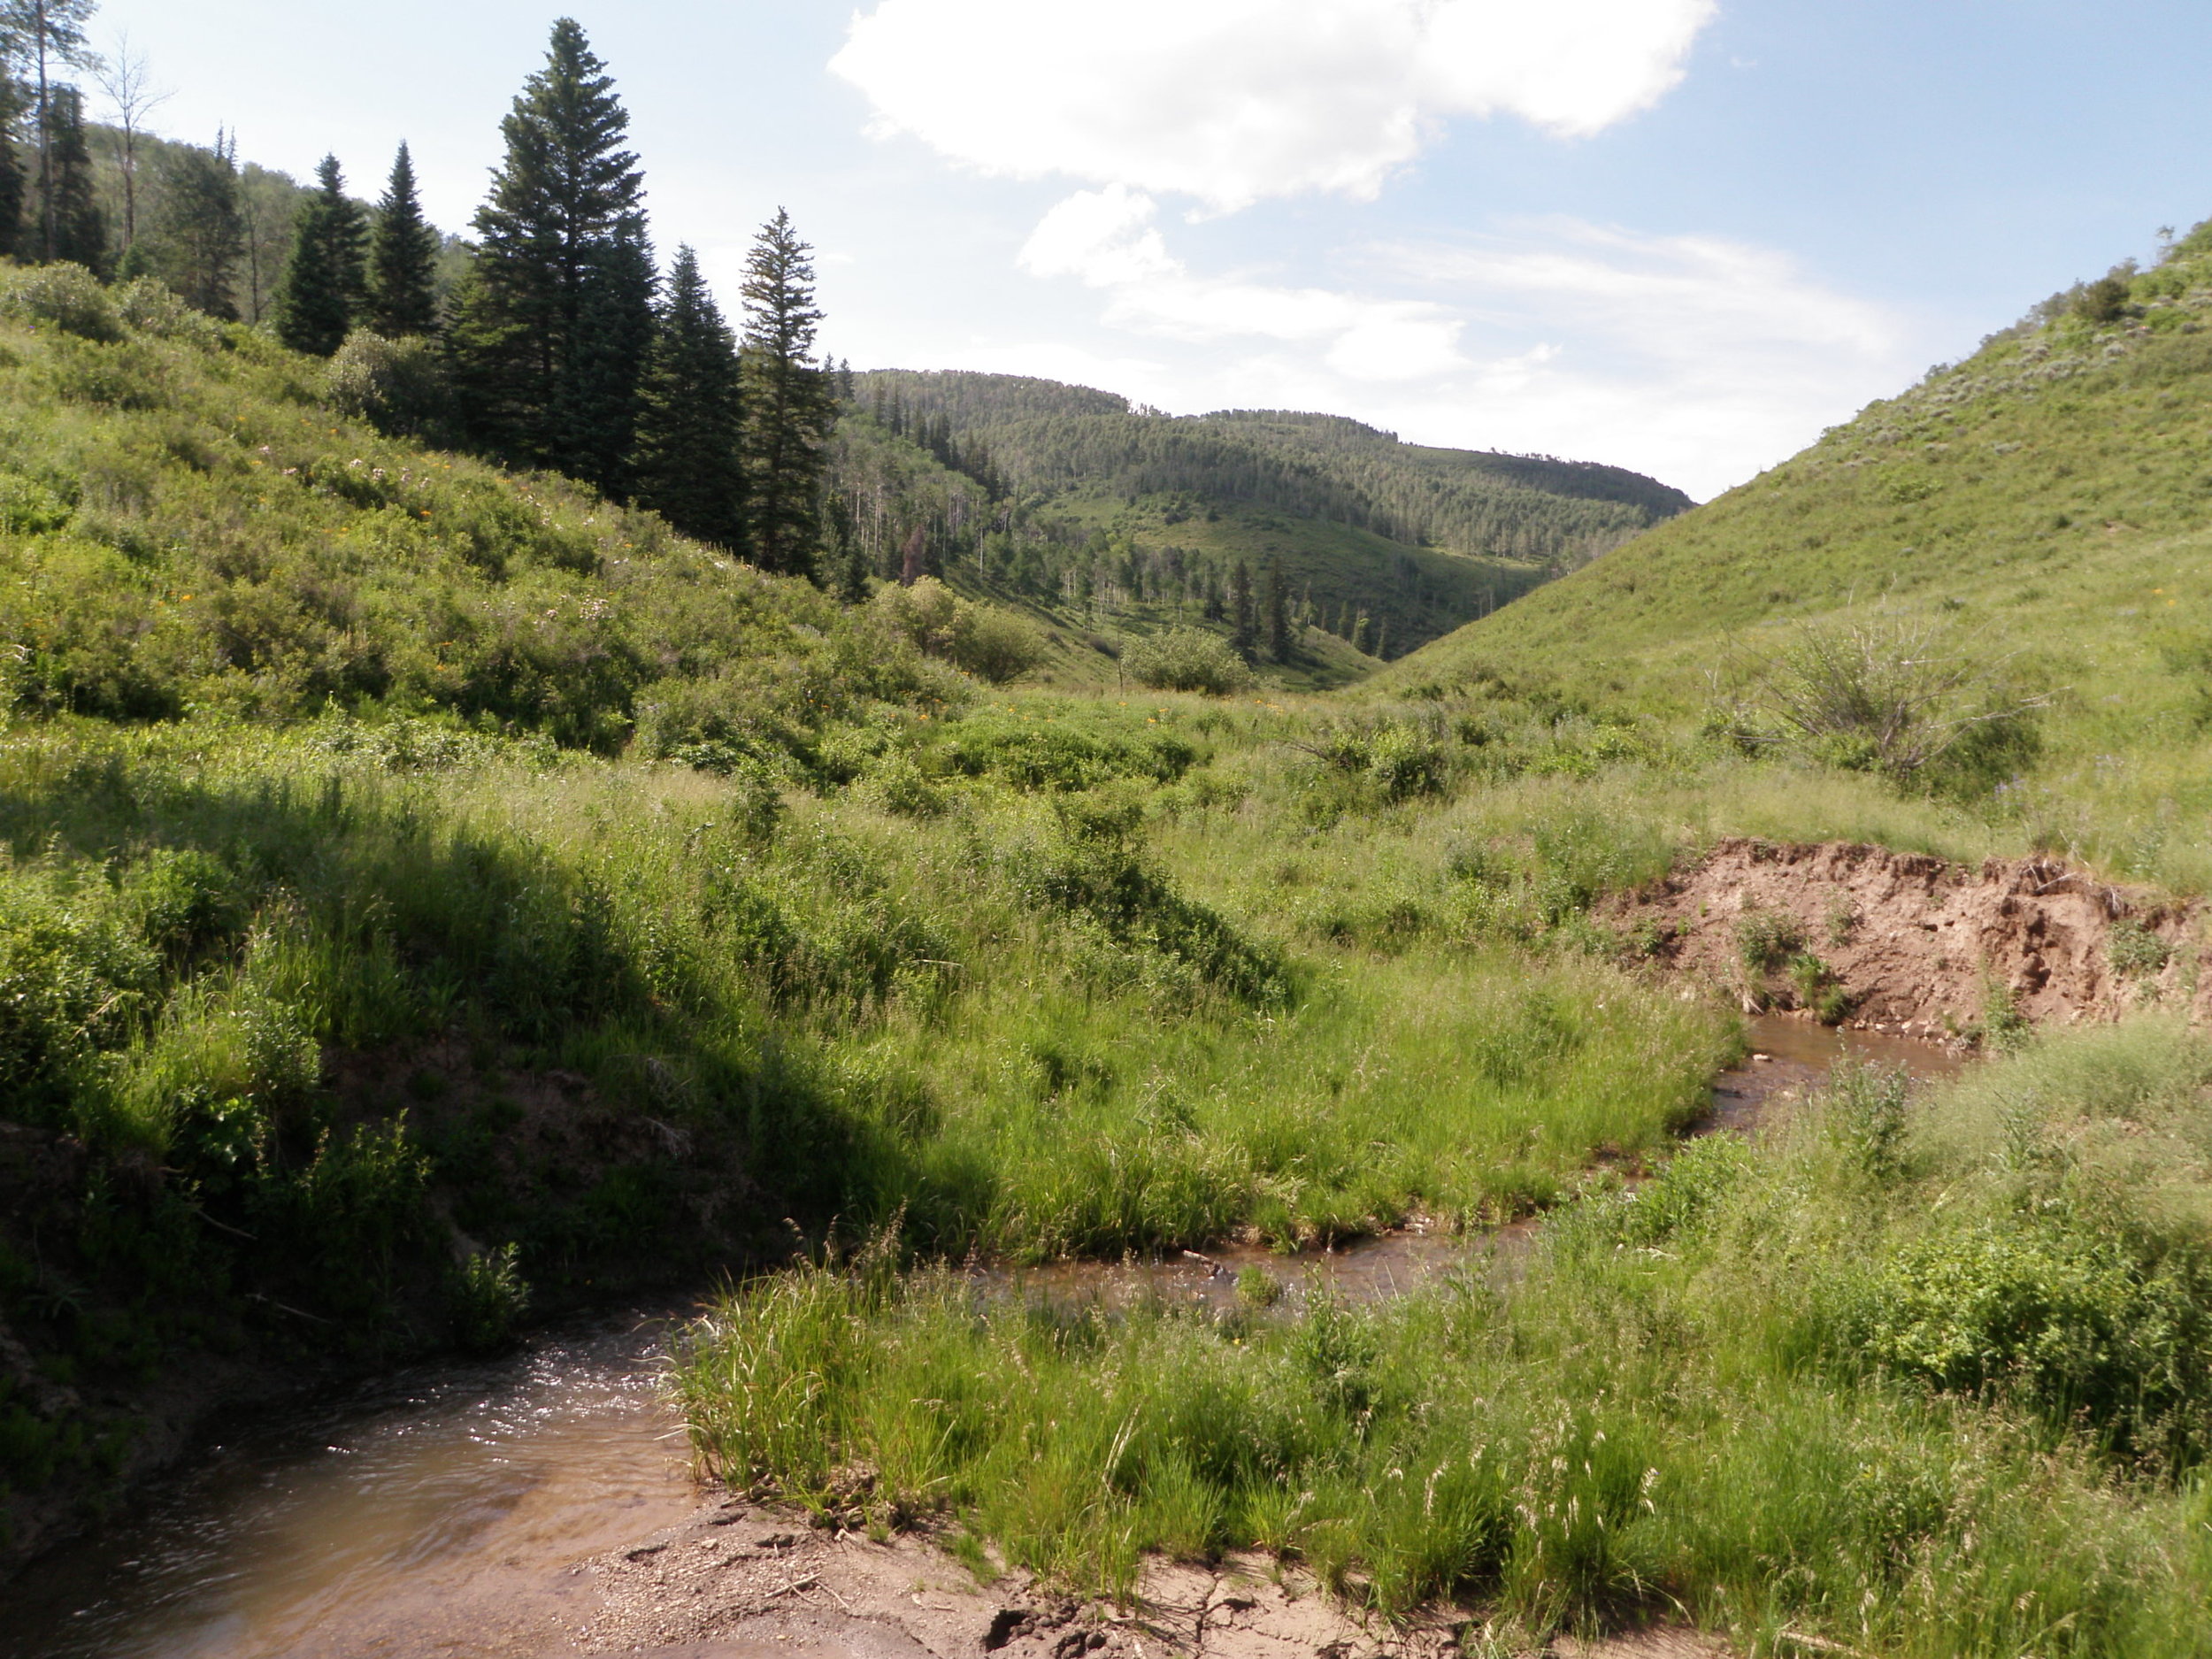 Extensive erosion and subsequent silt impacts cutthroat trout spawning at Butler Creek